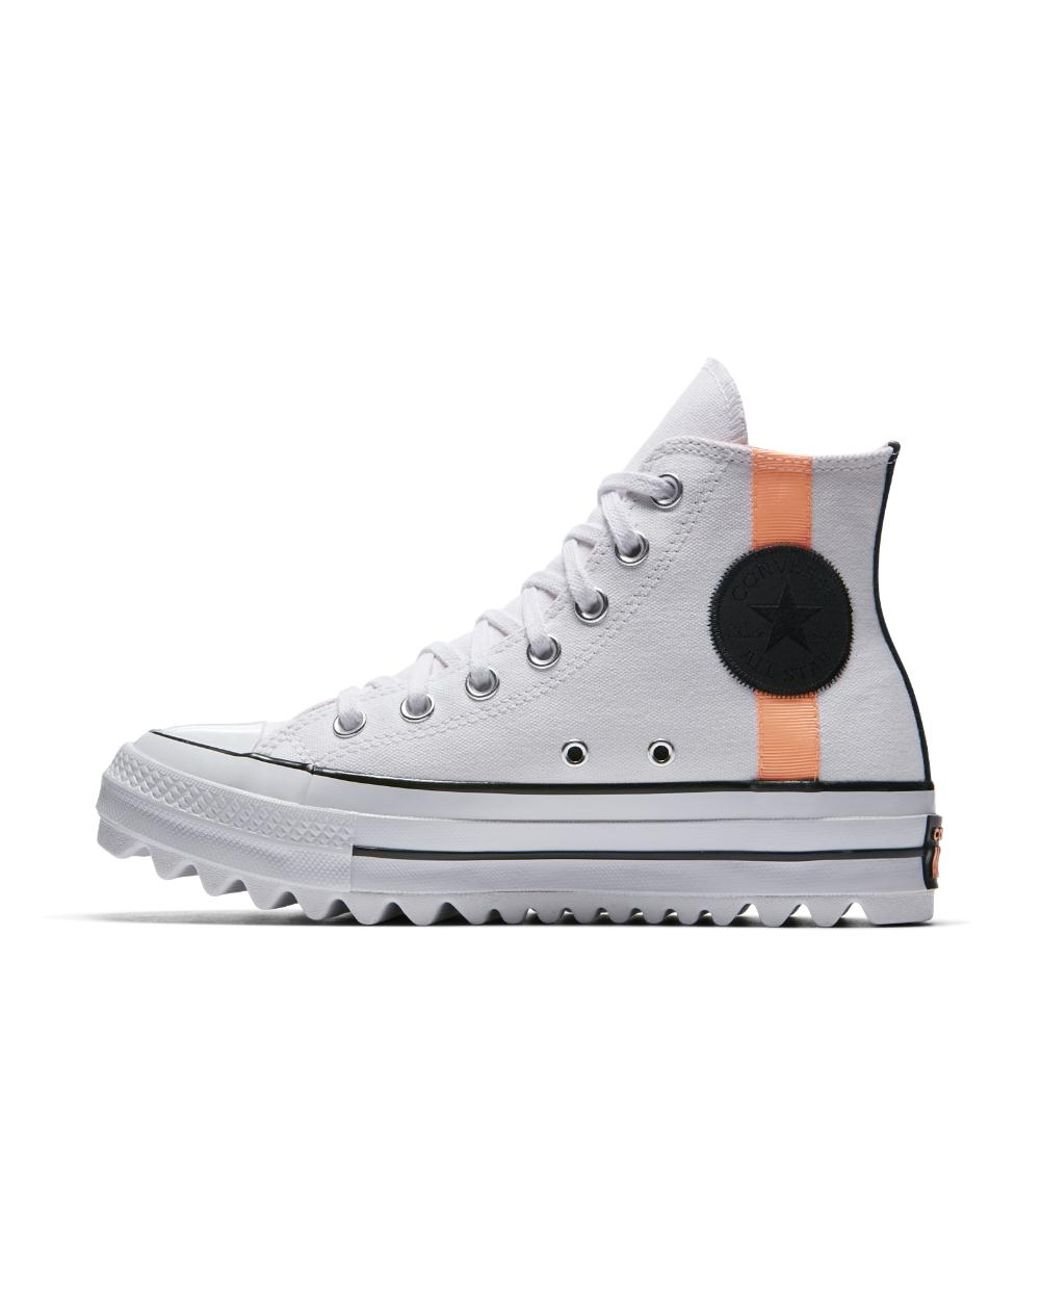 Converse Canvas Chuck Taylor All Star Lift Ripple High Top Women's Shoe in  White | Lyst